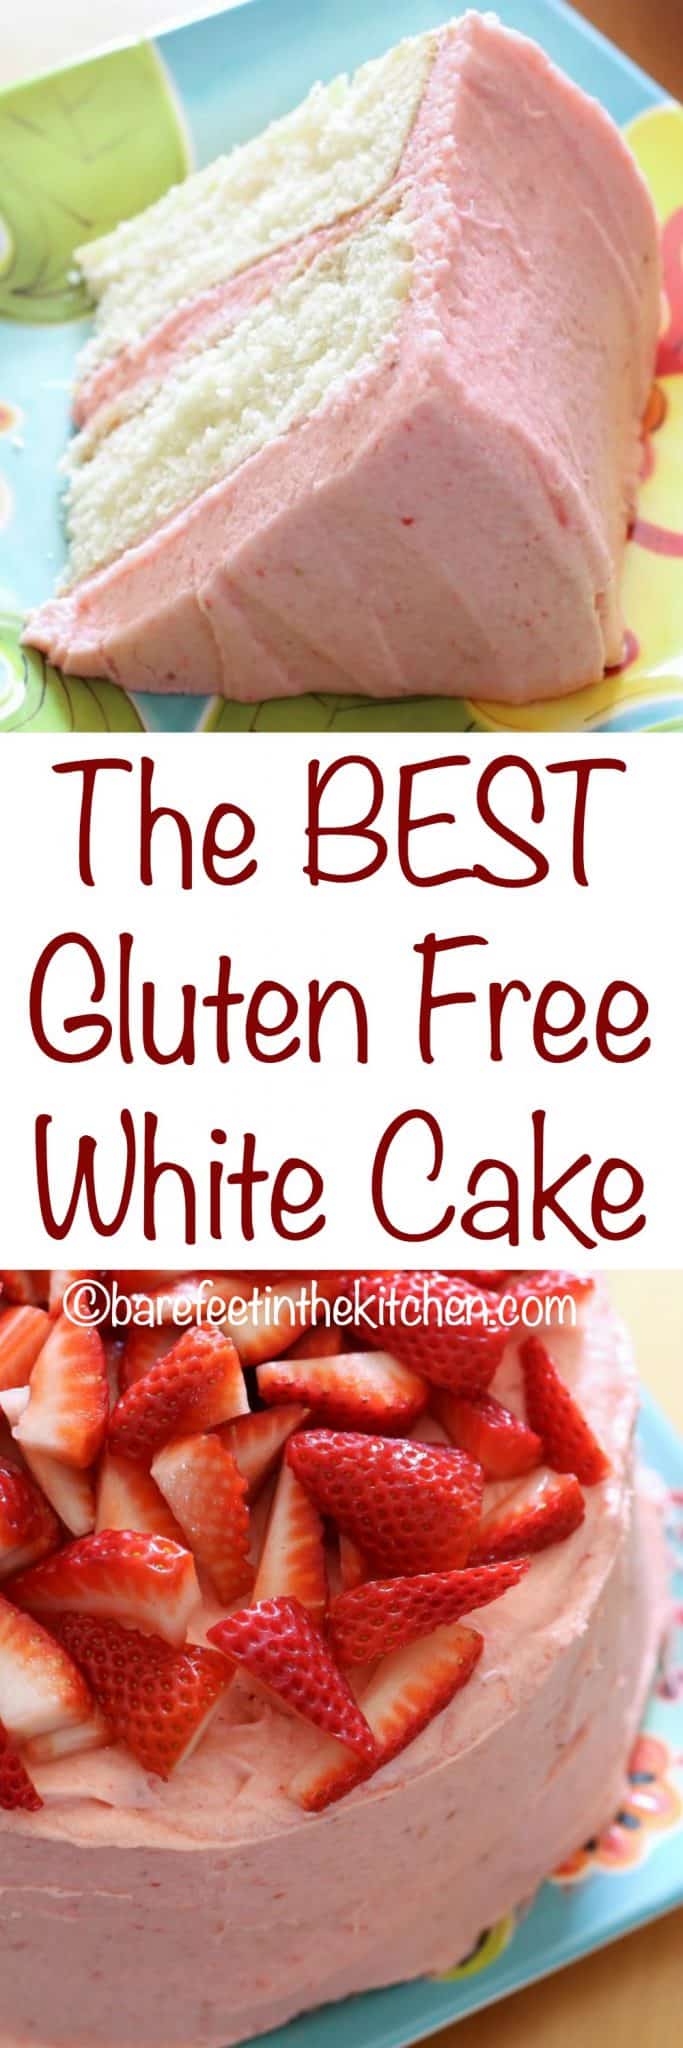 The Best Gluten Free White Cake - She Likes Food